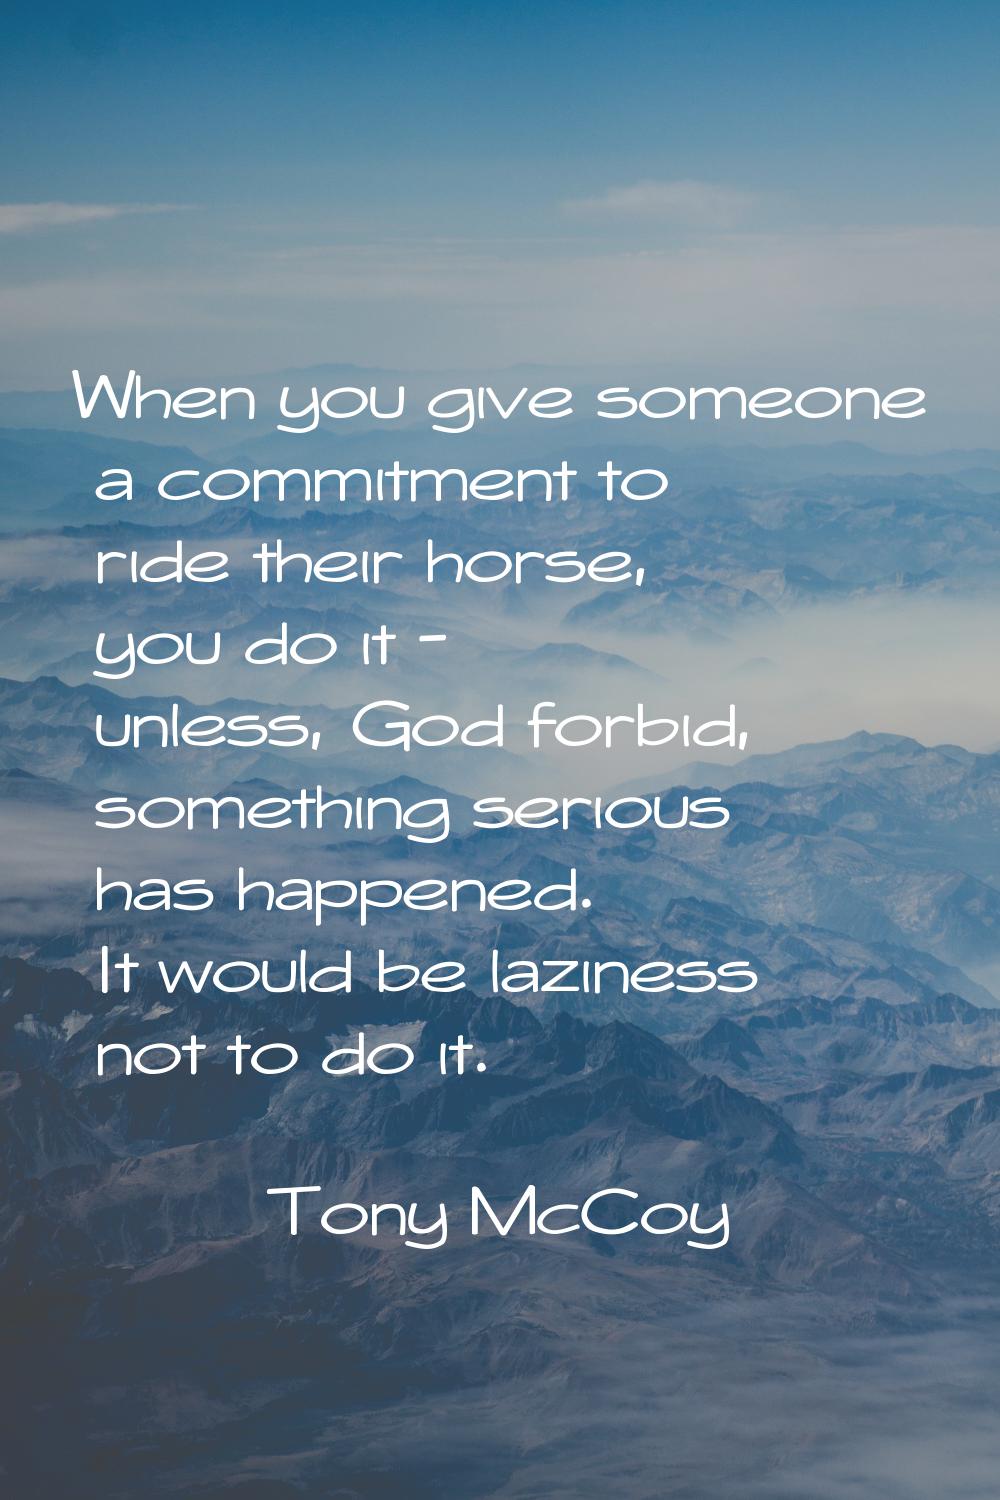 When you give someone a commitment to ride their horse, you do it - unless, God forbid, something s